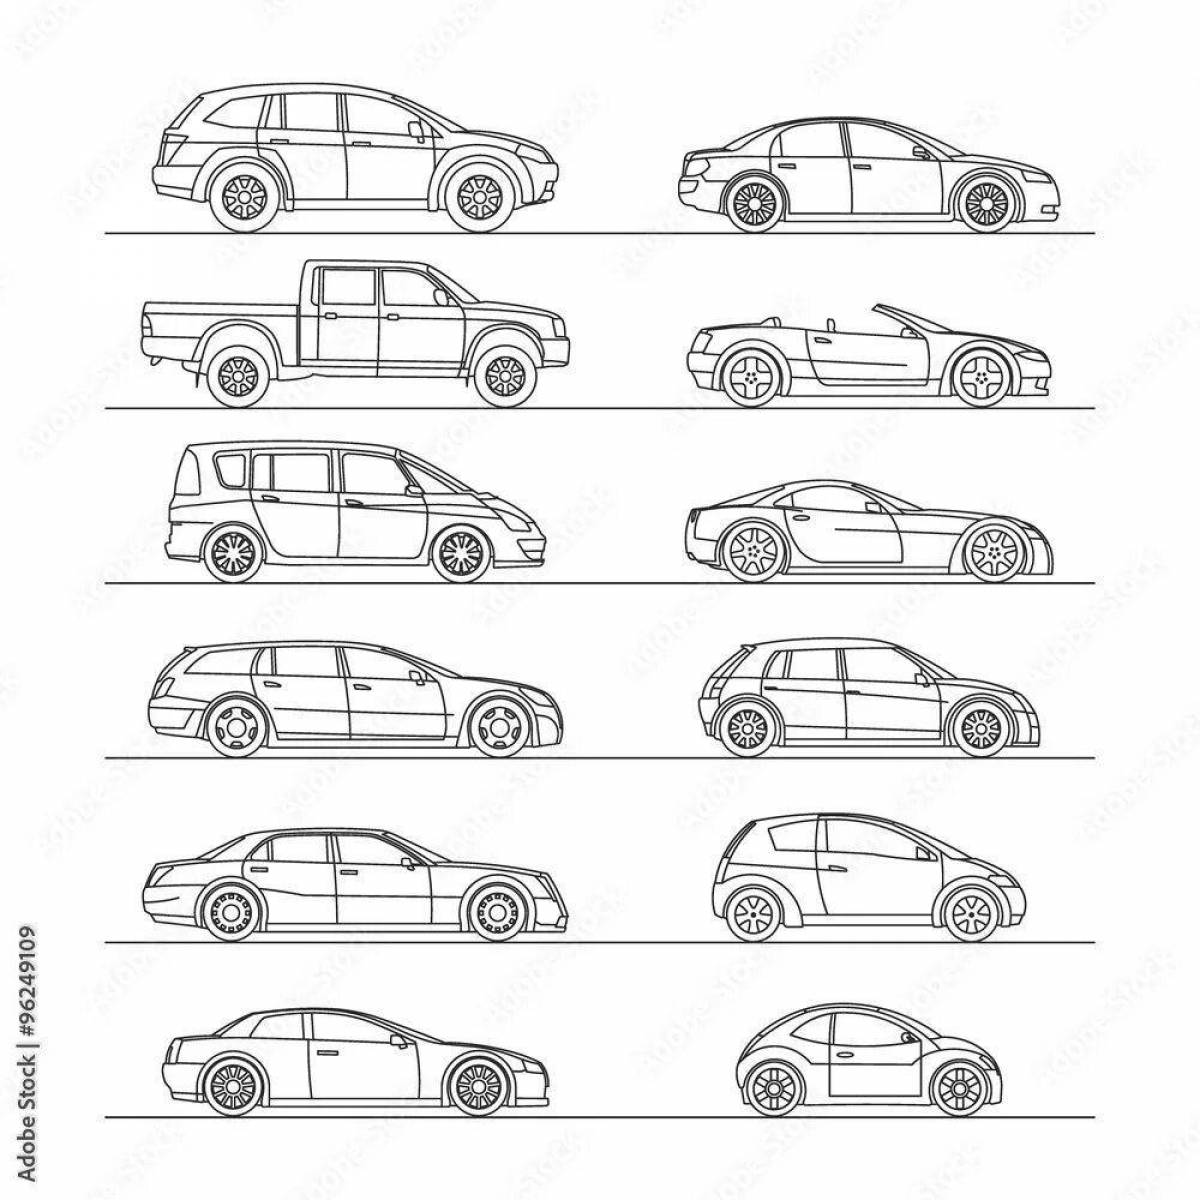 Charming car parking coloring book